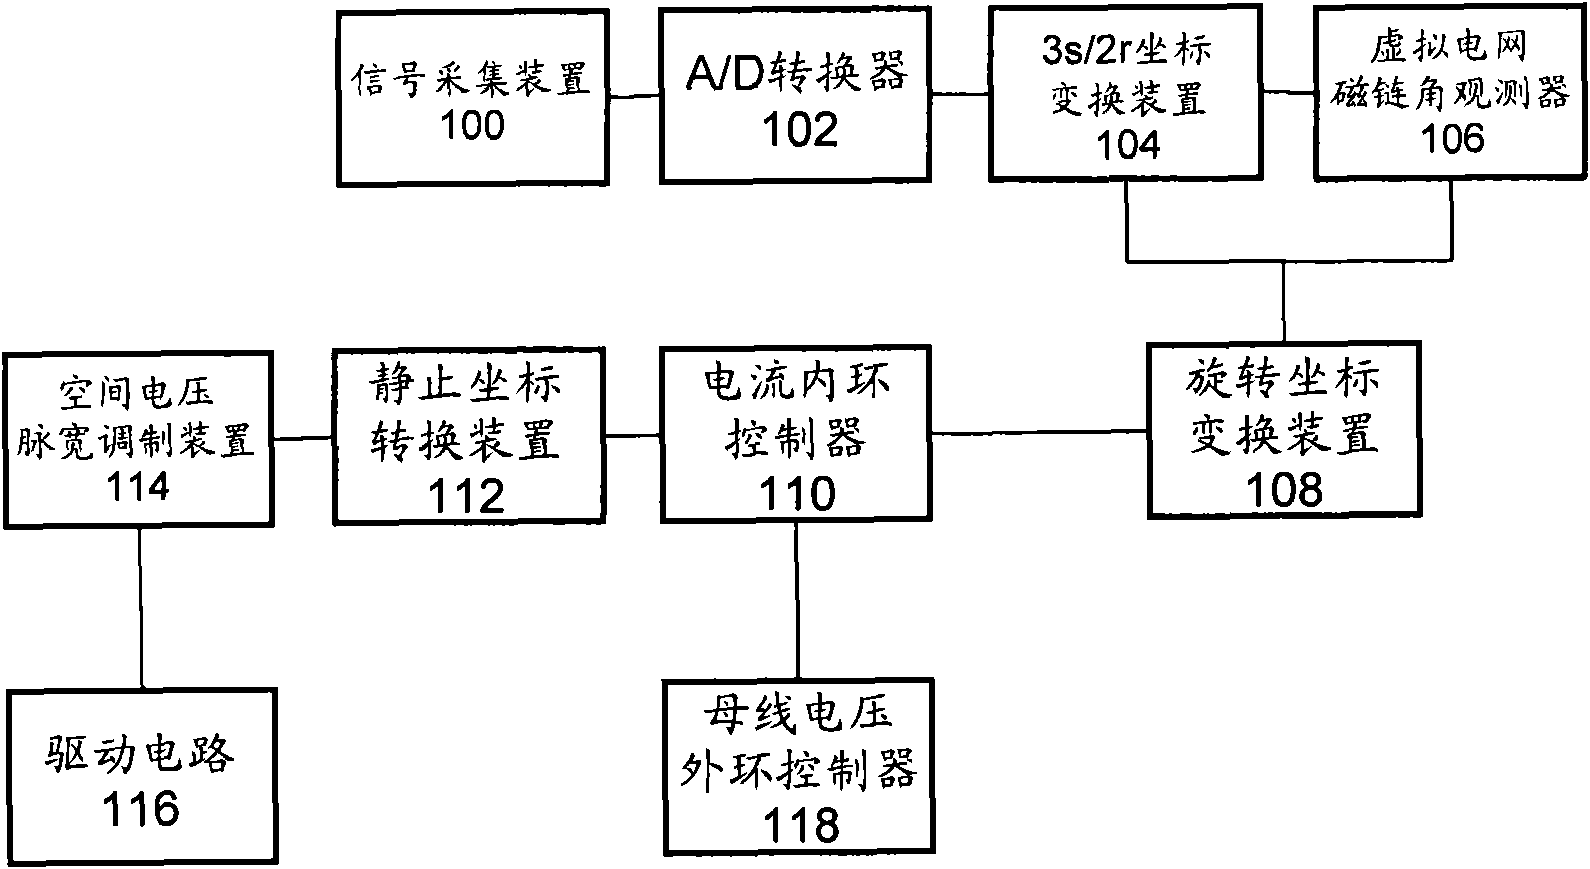 Method and system for controlling network-side converter